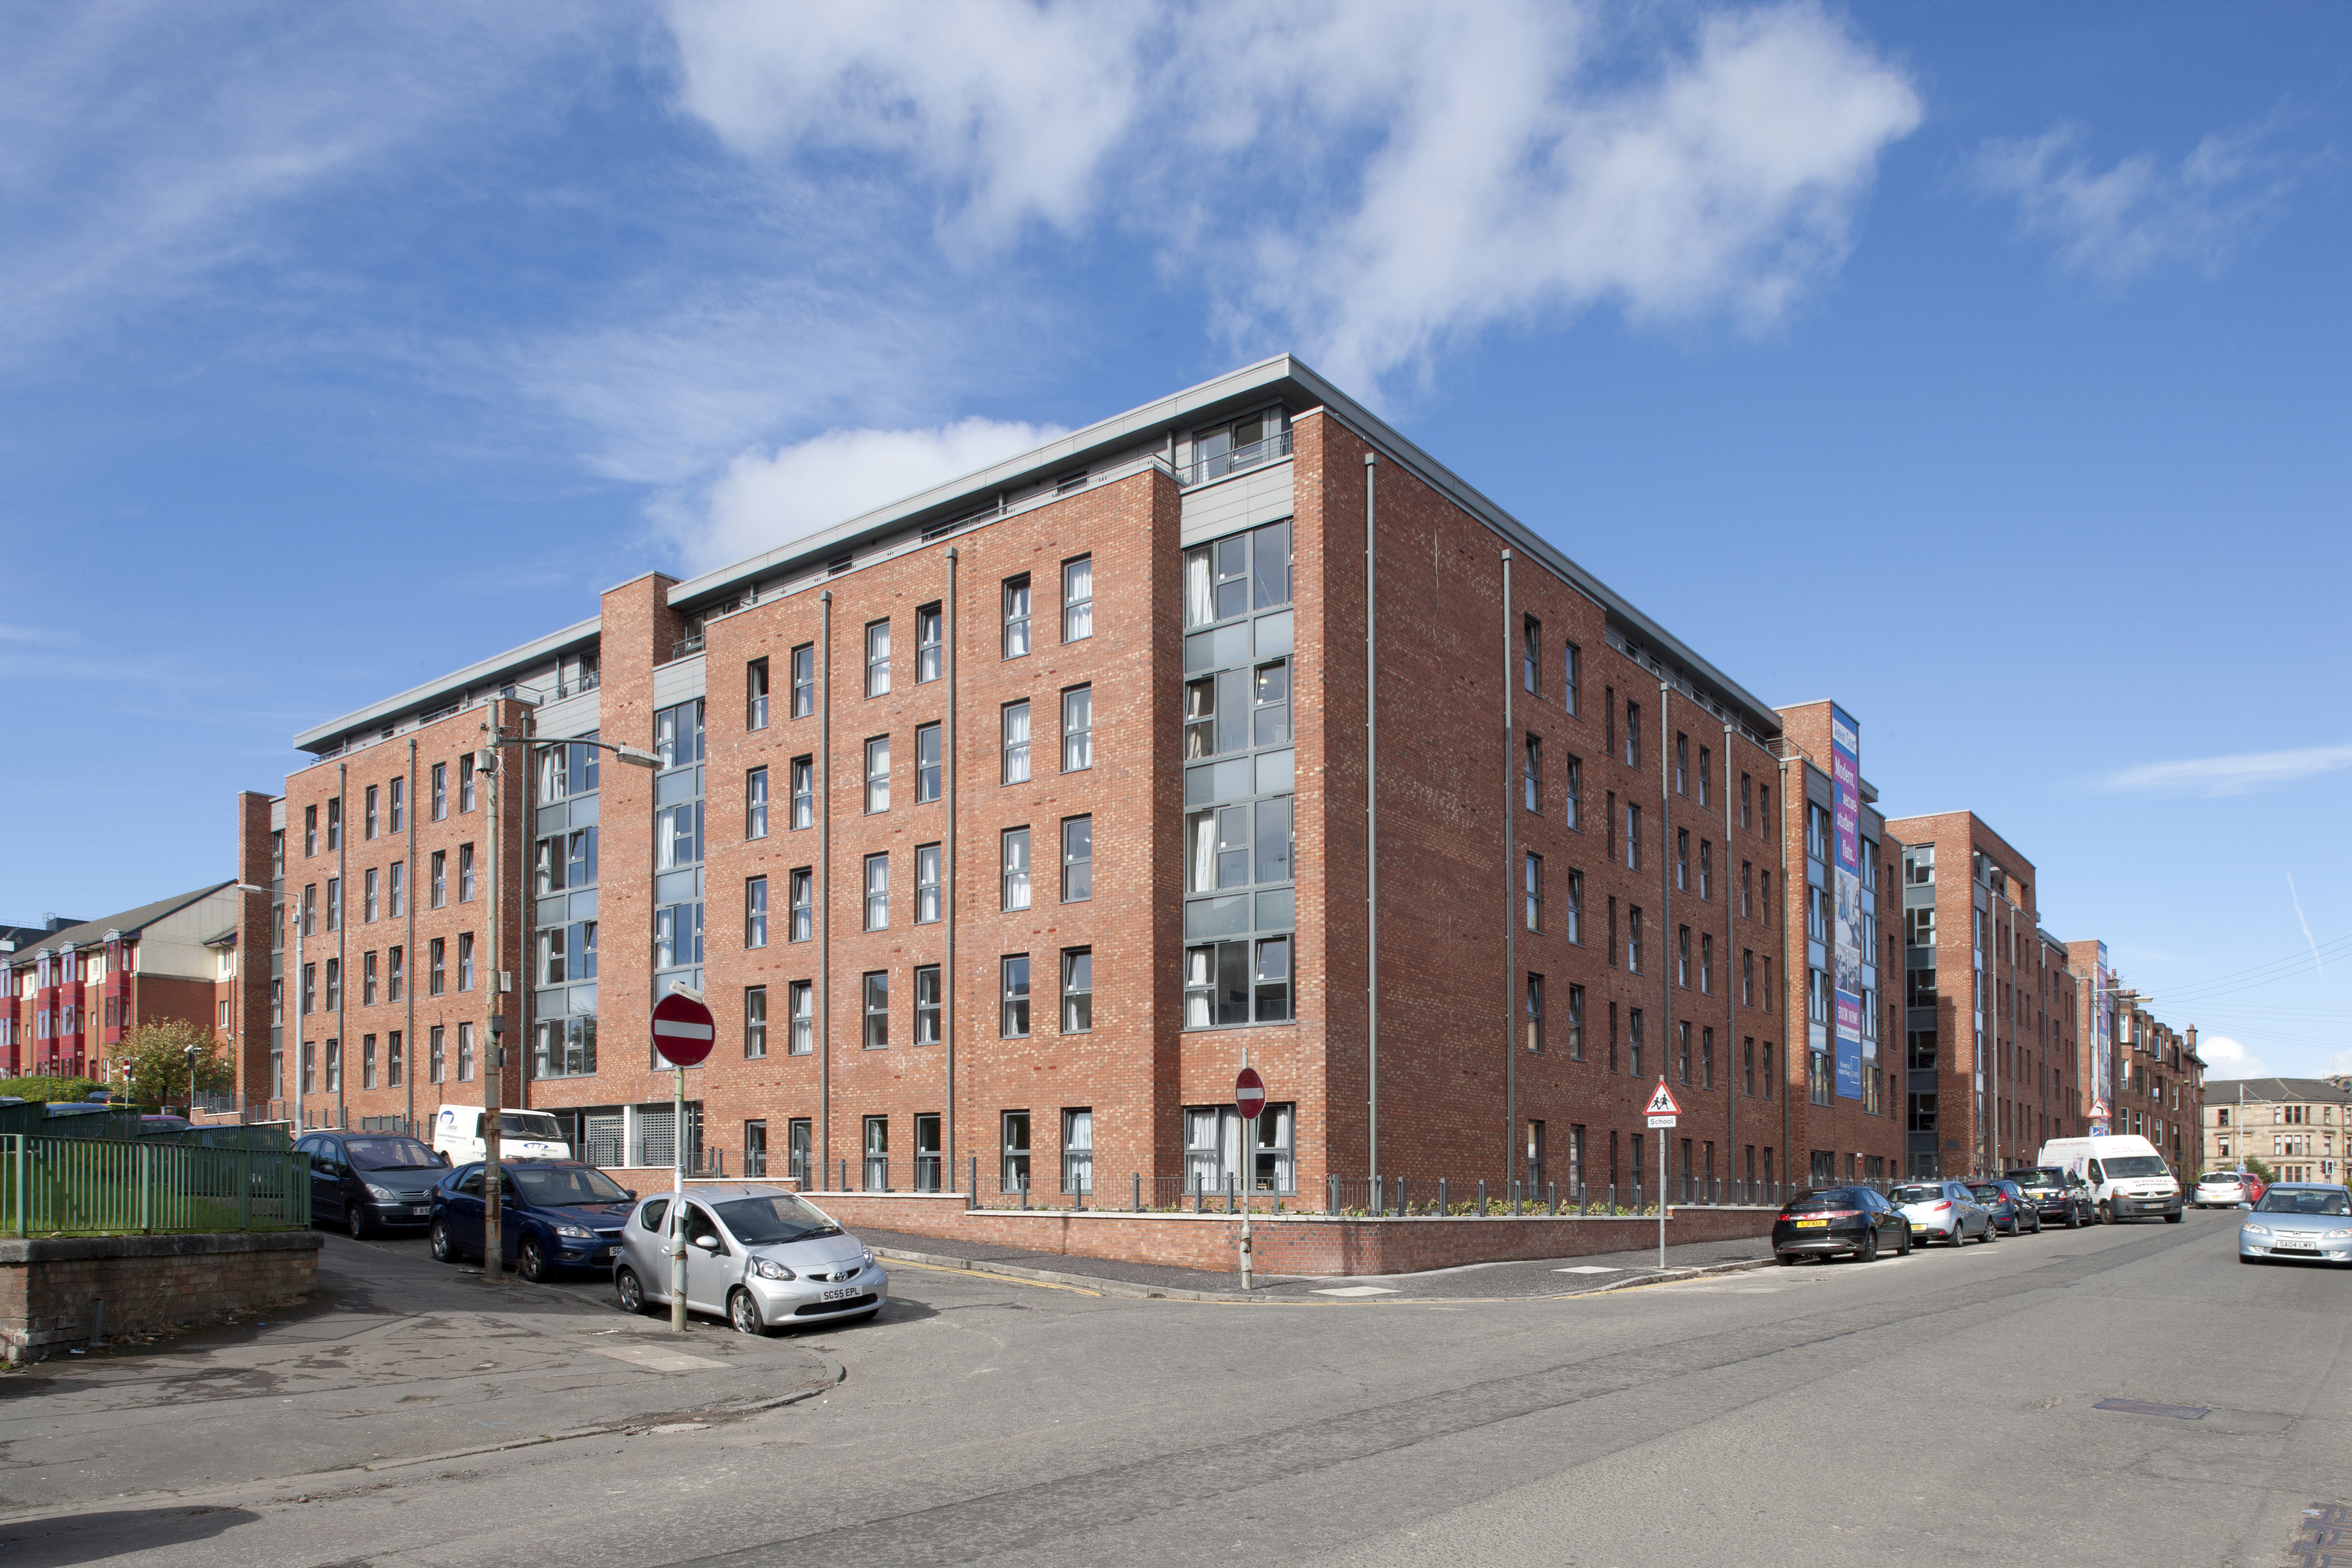 The new student residences in Yorkhill